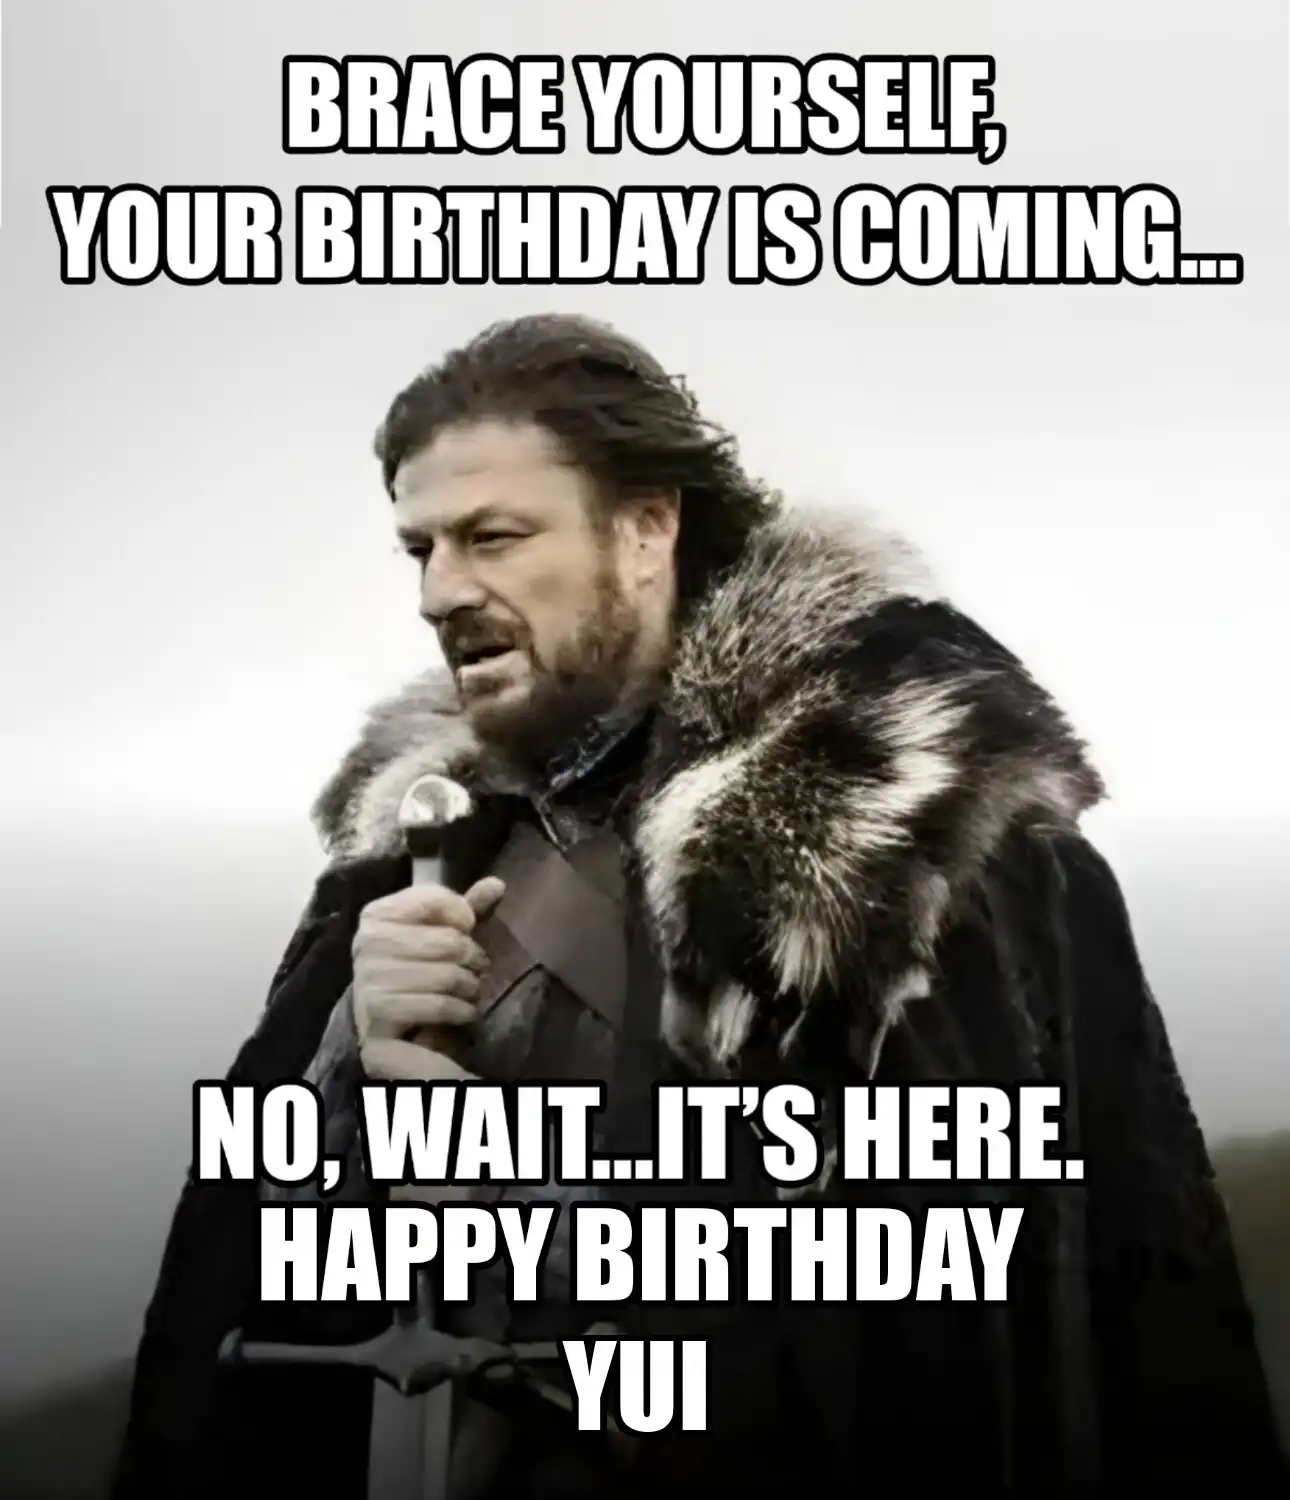 Happy Birthday Yui Brace Yourself Your Birthday Is Coming Meme